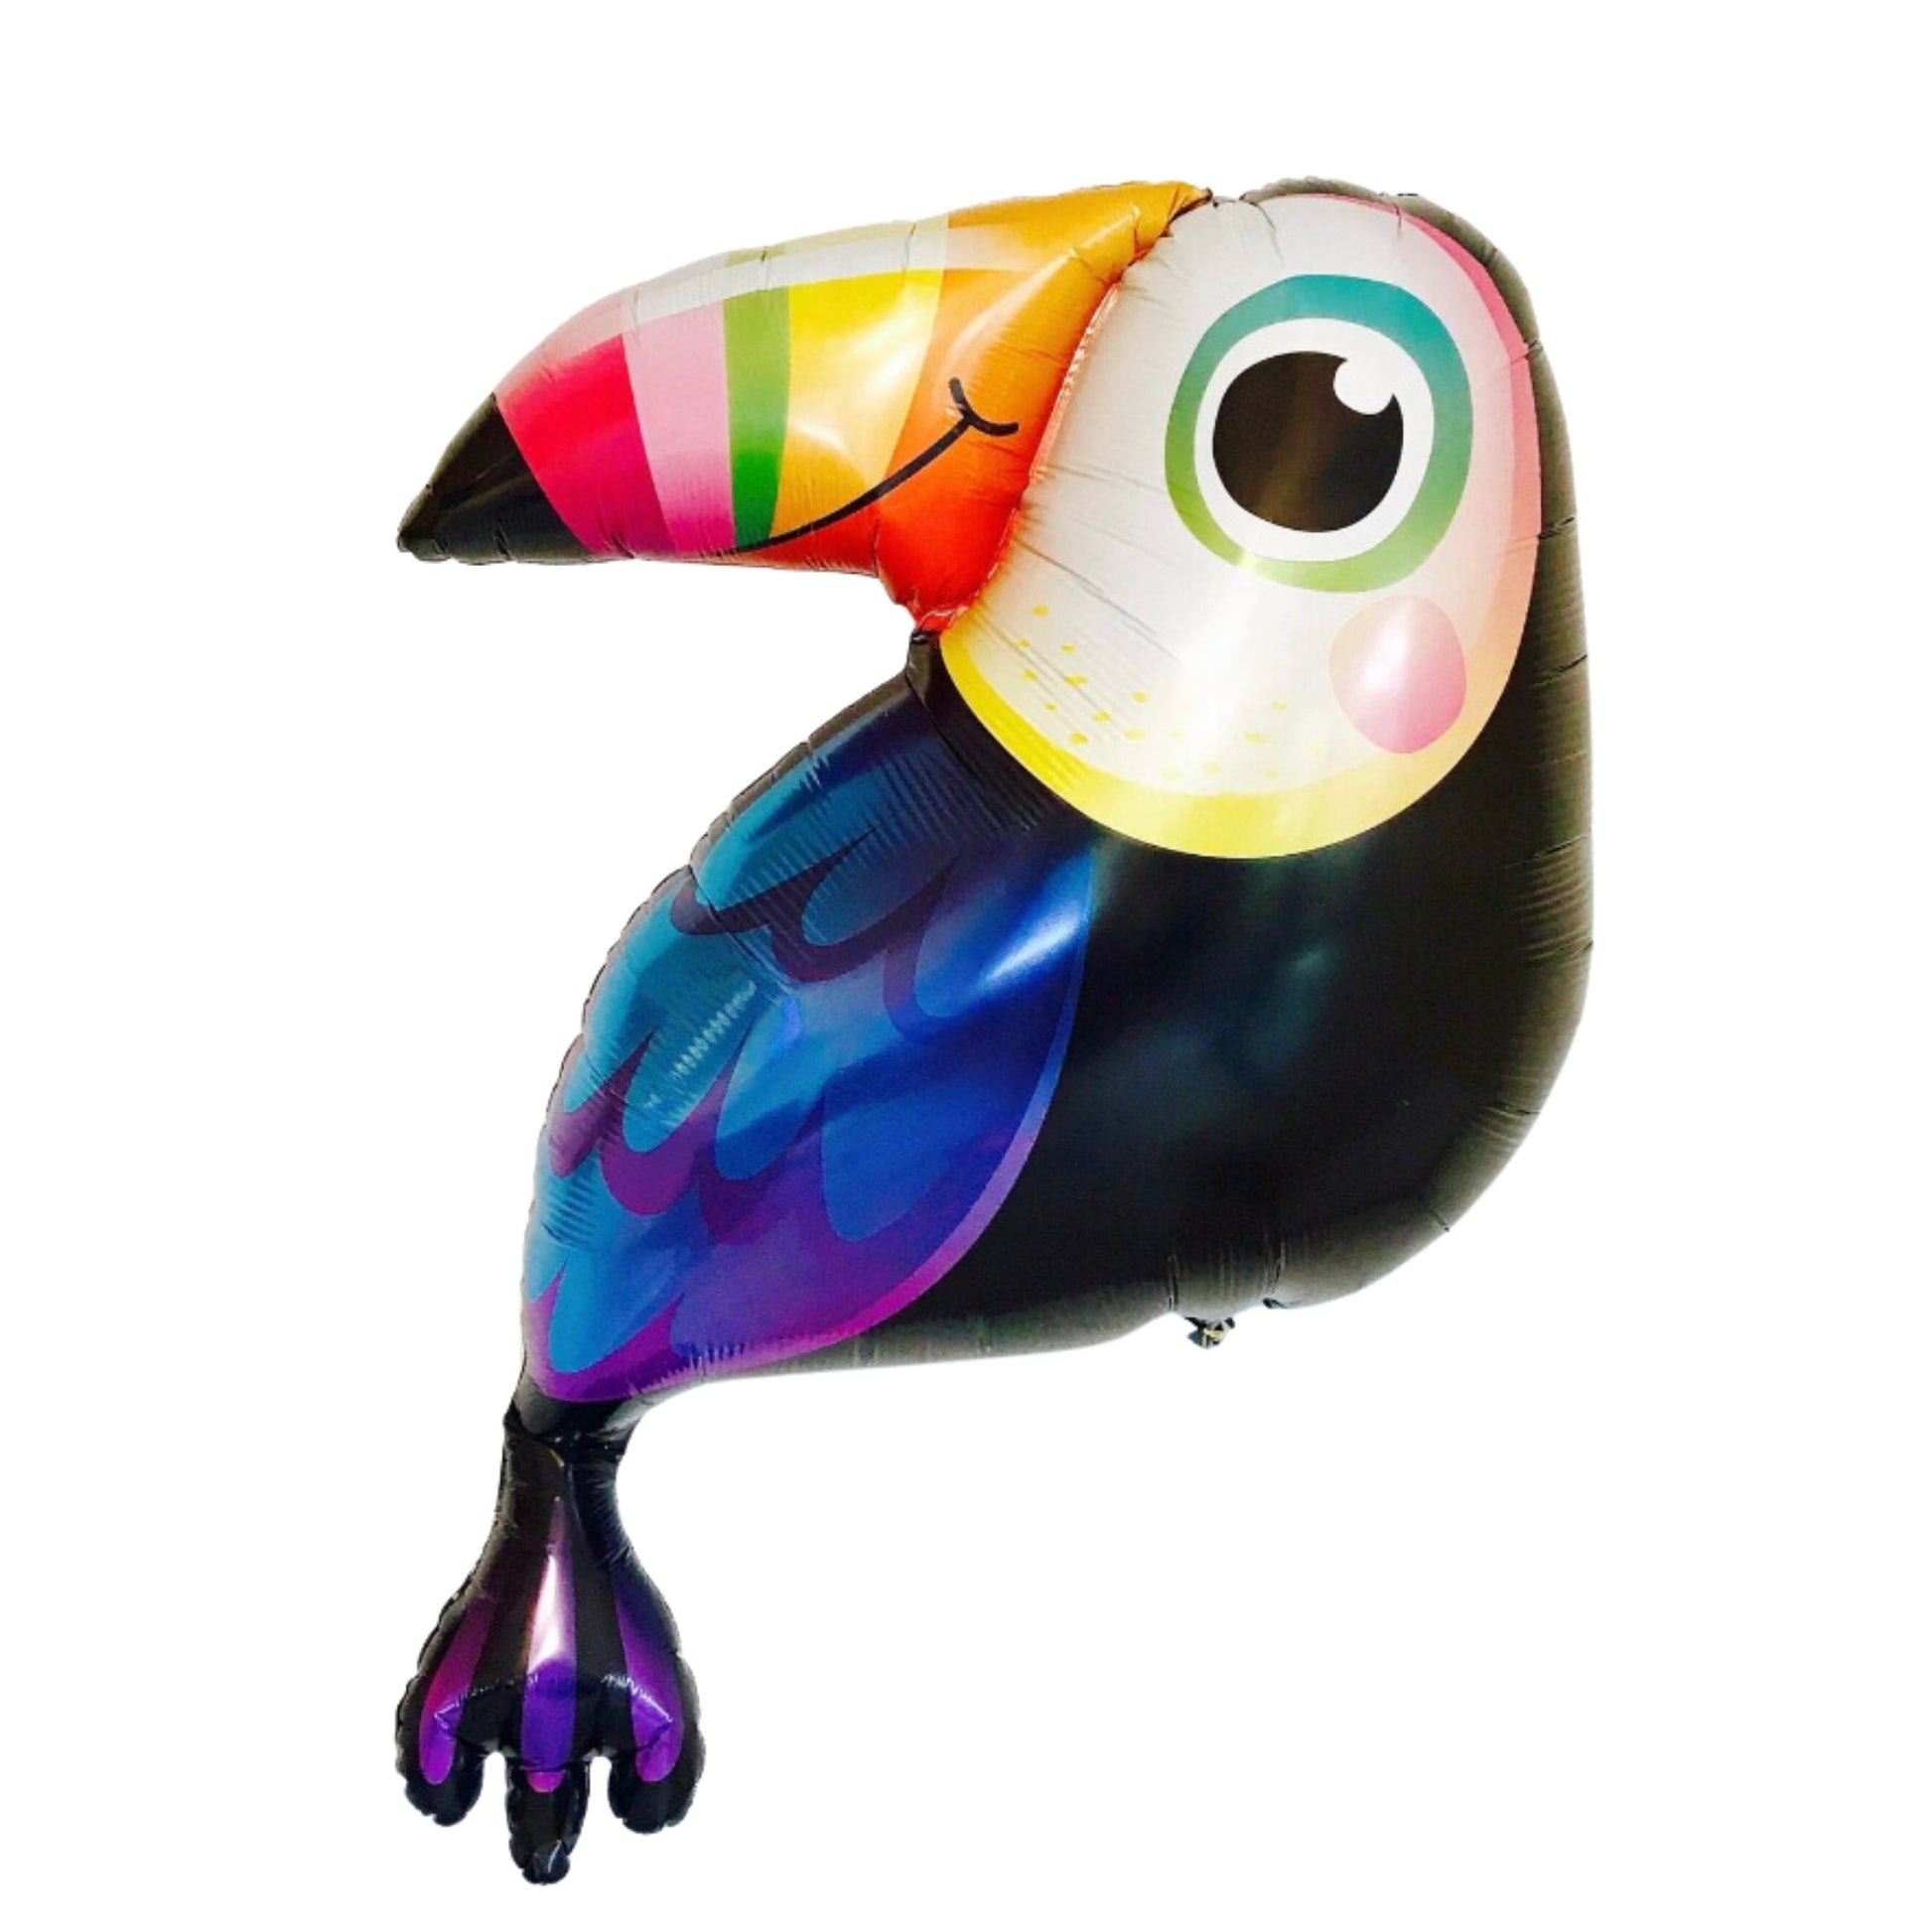 Giant toucan balloon in bright colours. 104cm